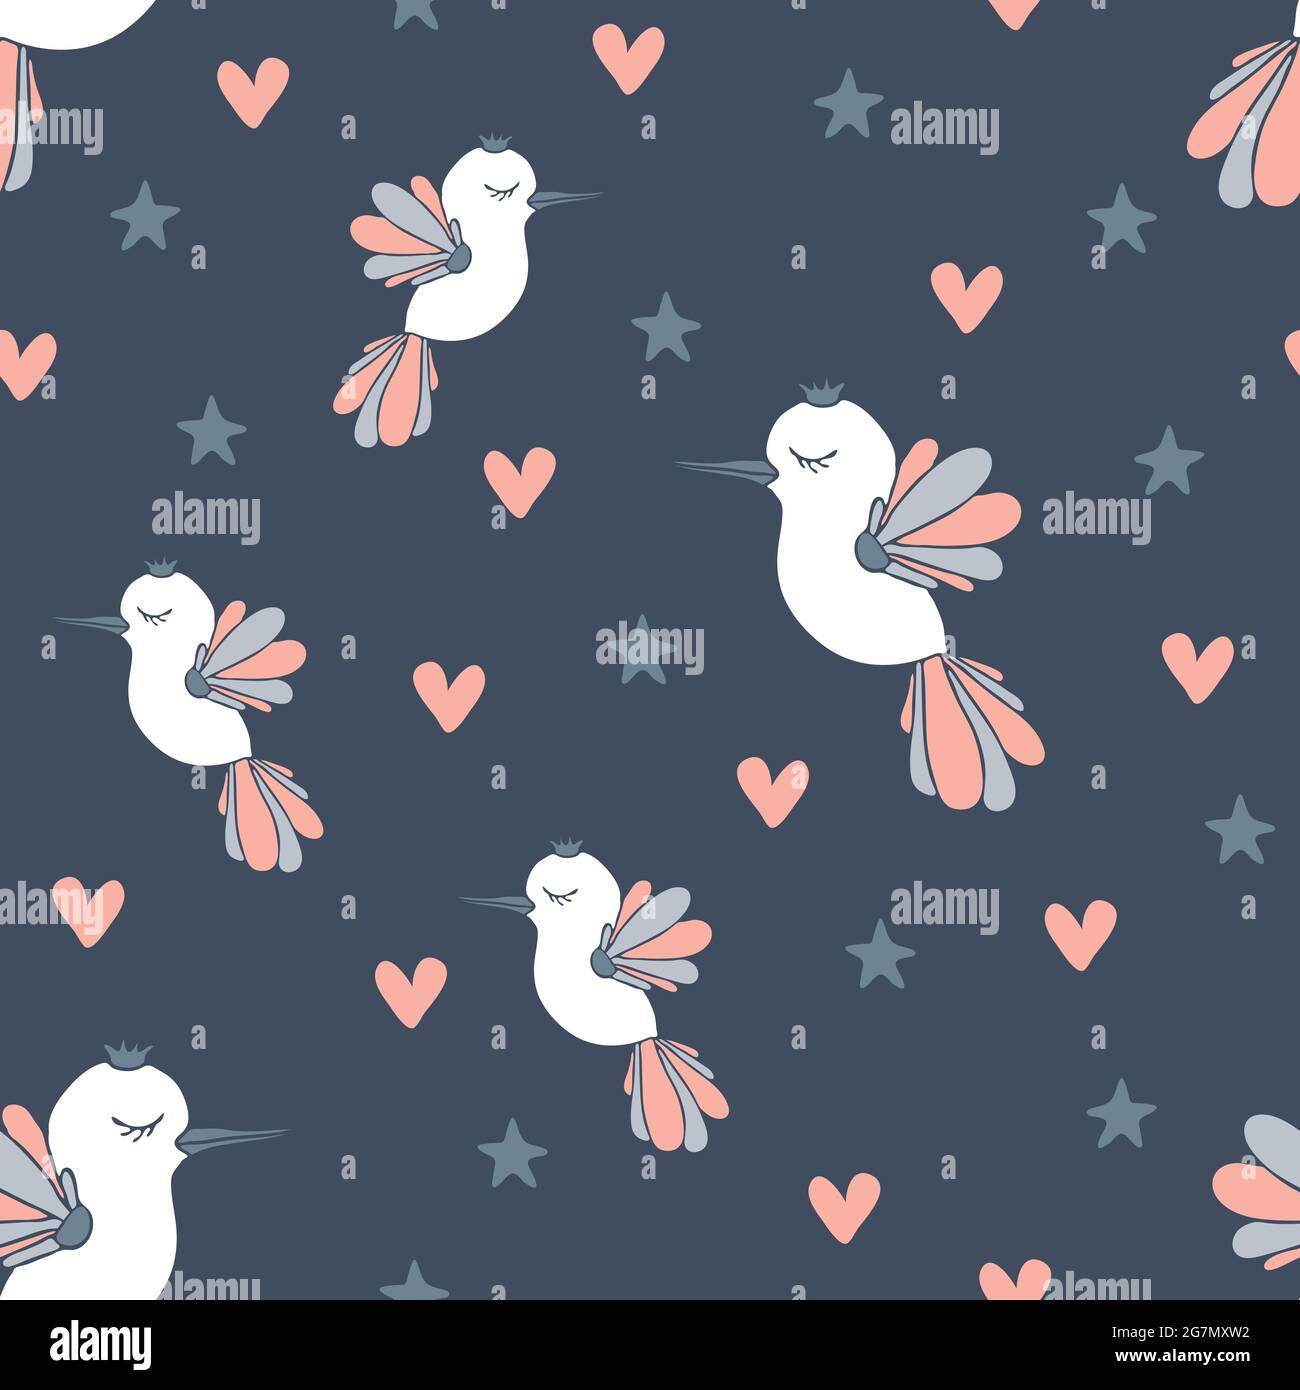 Seamless vector pattern with love birds and stars on blue background. Cute dreaming animal wallpaper design pastel colours. Stock Vector